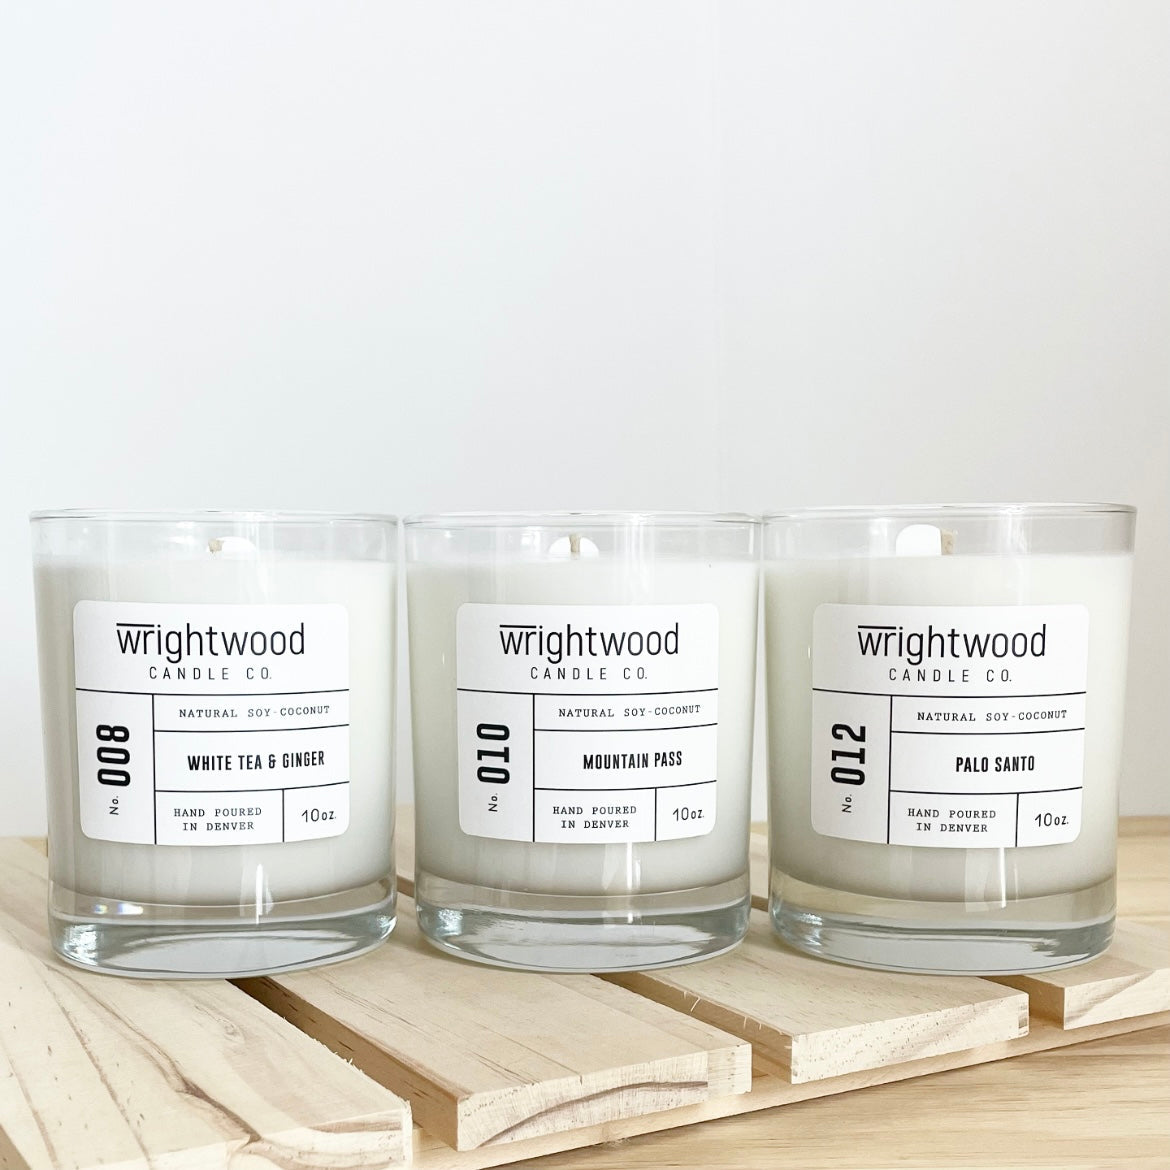 Three candles are sitting on top of a wood slatted board that is resting over a wood table. The background is neutral colored. The three candles are forward facing and have white labels with black text. The text includes the company name (Wrightwood Candle Co), scent name, what it is made out of (soy-coconut wax), where it is hand poured (Denver) and item weight (10oz.)